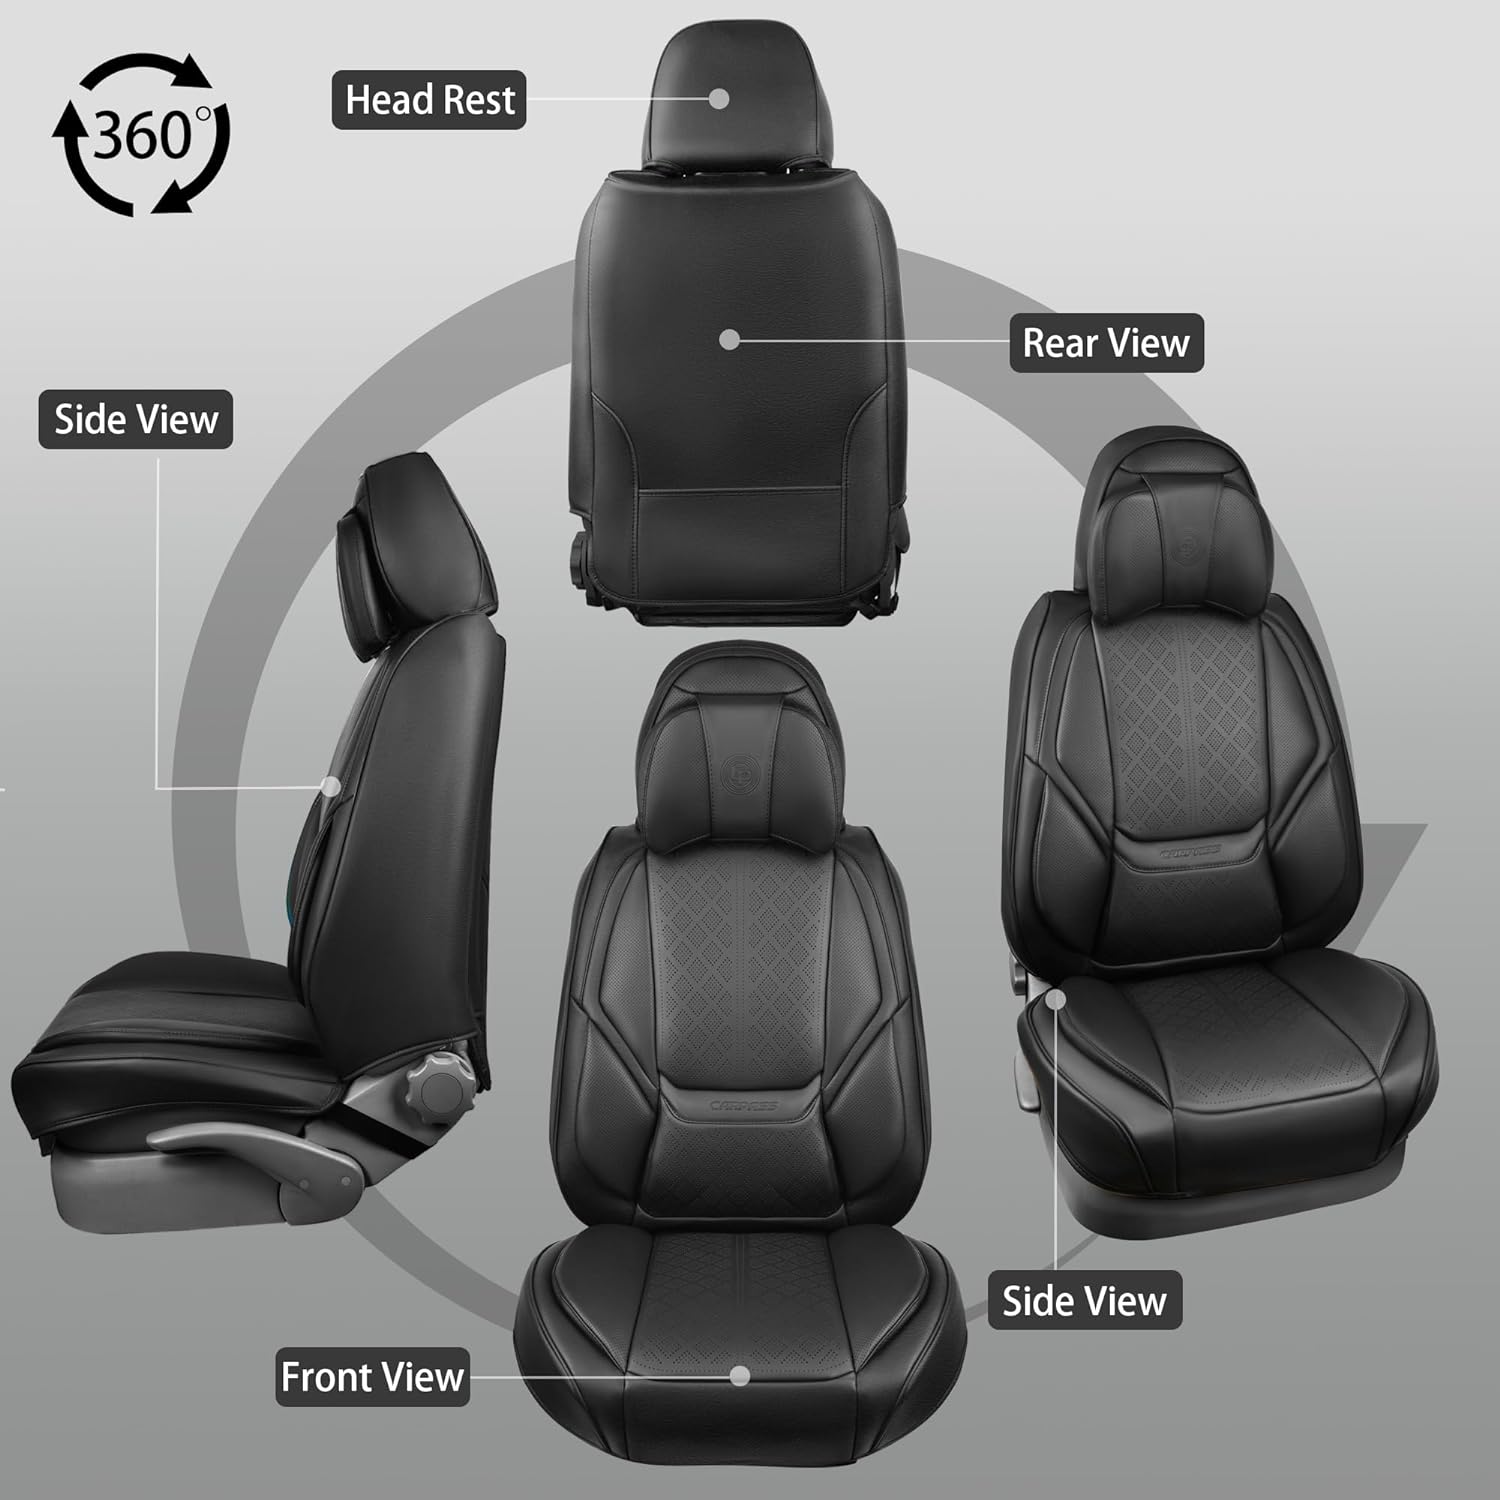 CAR PASS Nappa Leather Car Seat Covers Full Set & Car Mats, 5 Seats Universal Seat Covers for Cars, Waterproof Luxury Lumbar Support Front and Rear Seat Cover for Sedan SUV Pick-up Truck (Black)